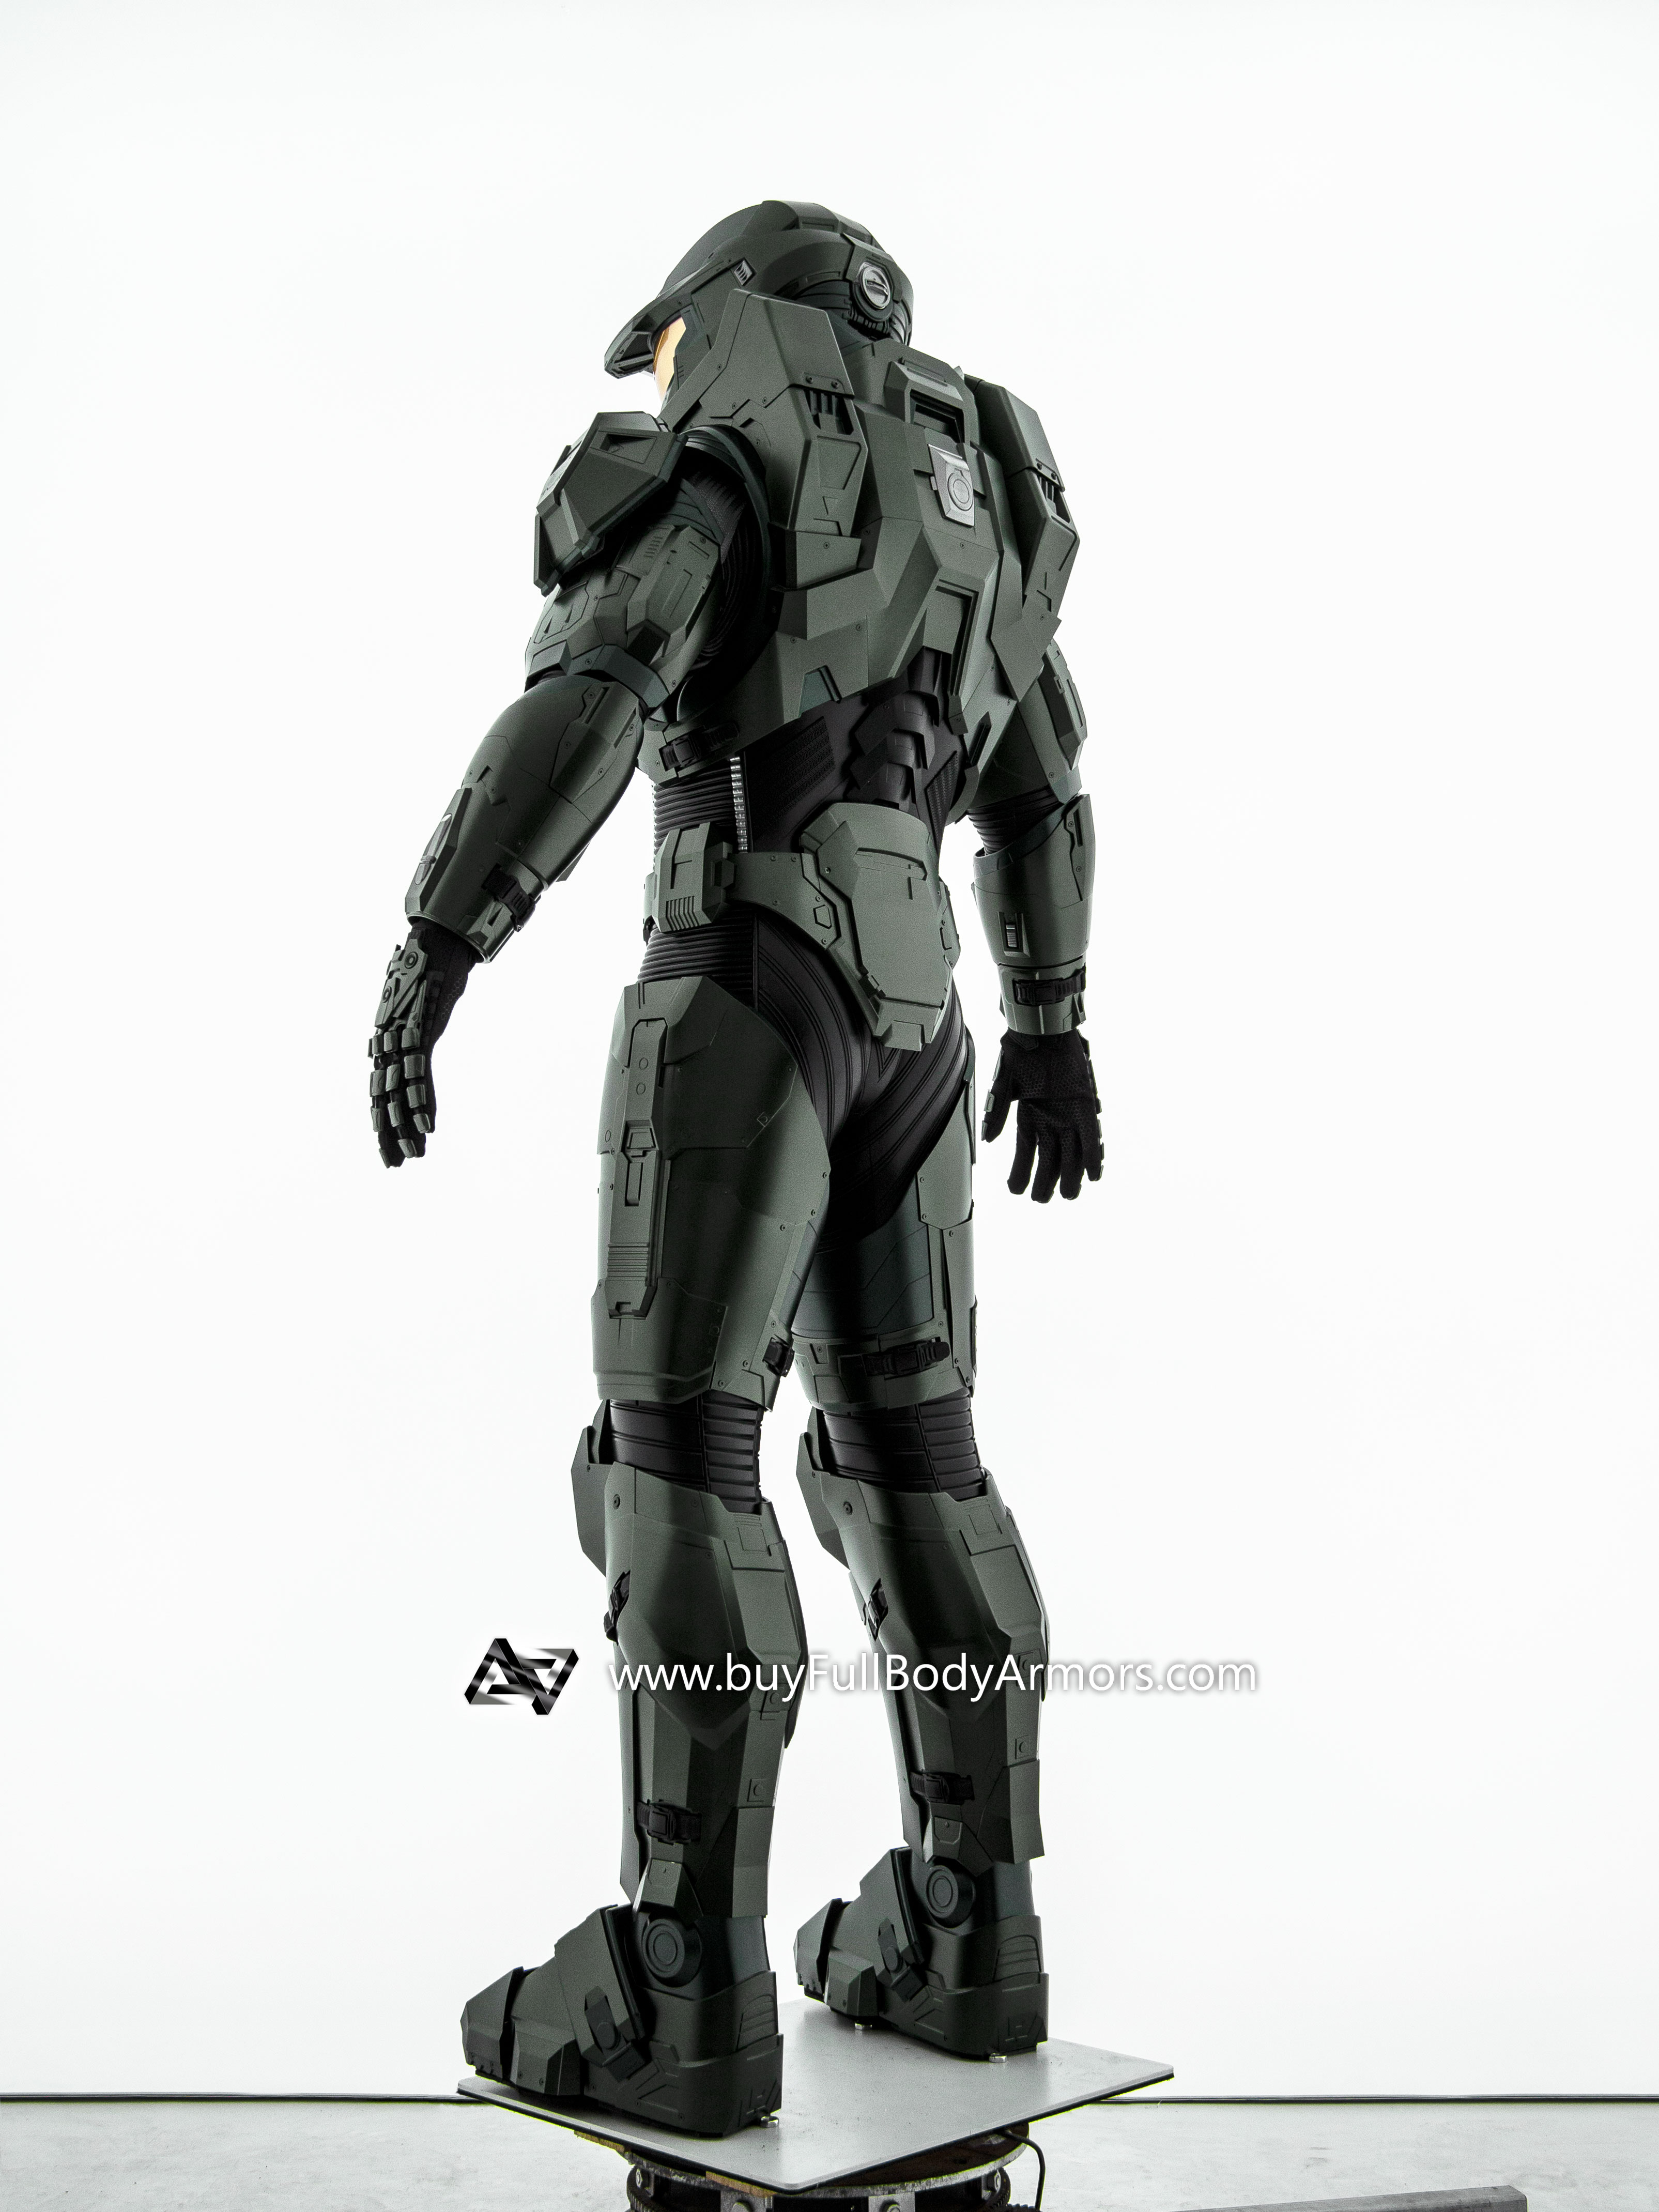 Wearable MASTER CHIEF ARMOR SUIT (Halo Infinity and Halo TV Series Season 2 Version) 2